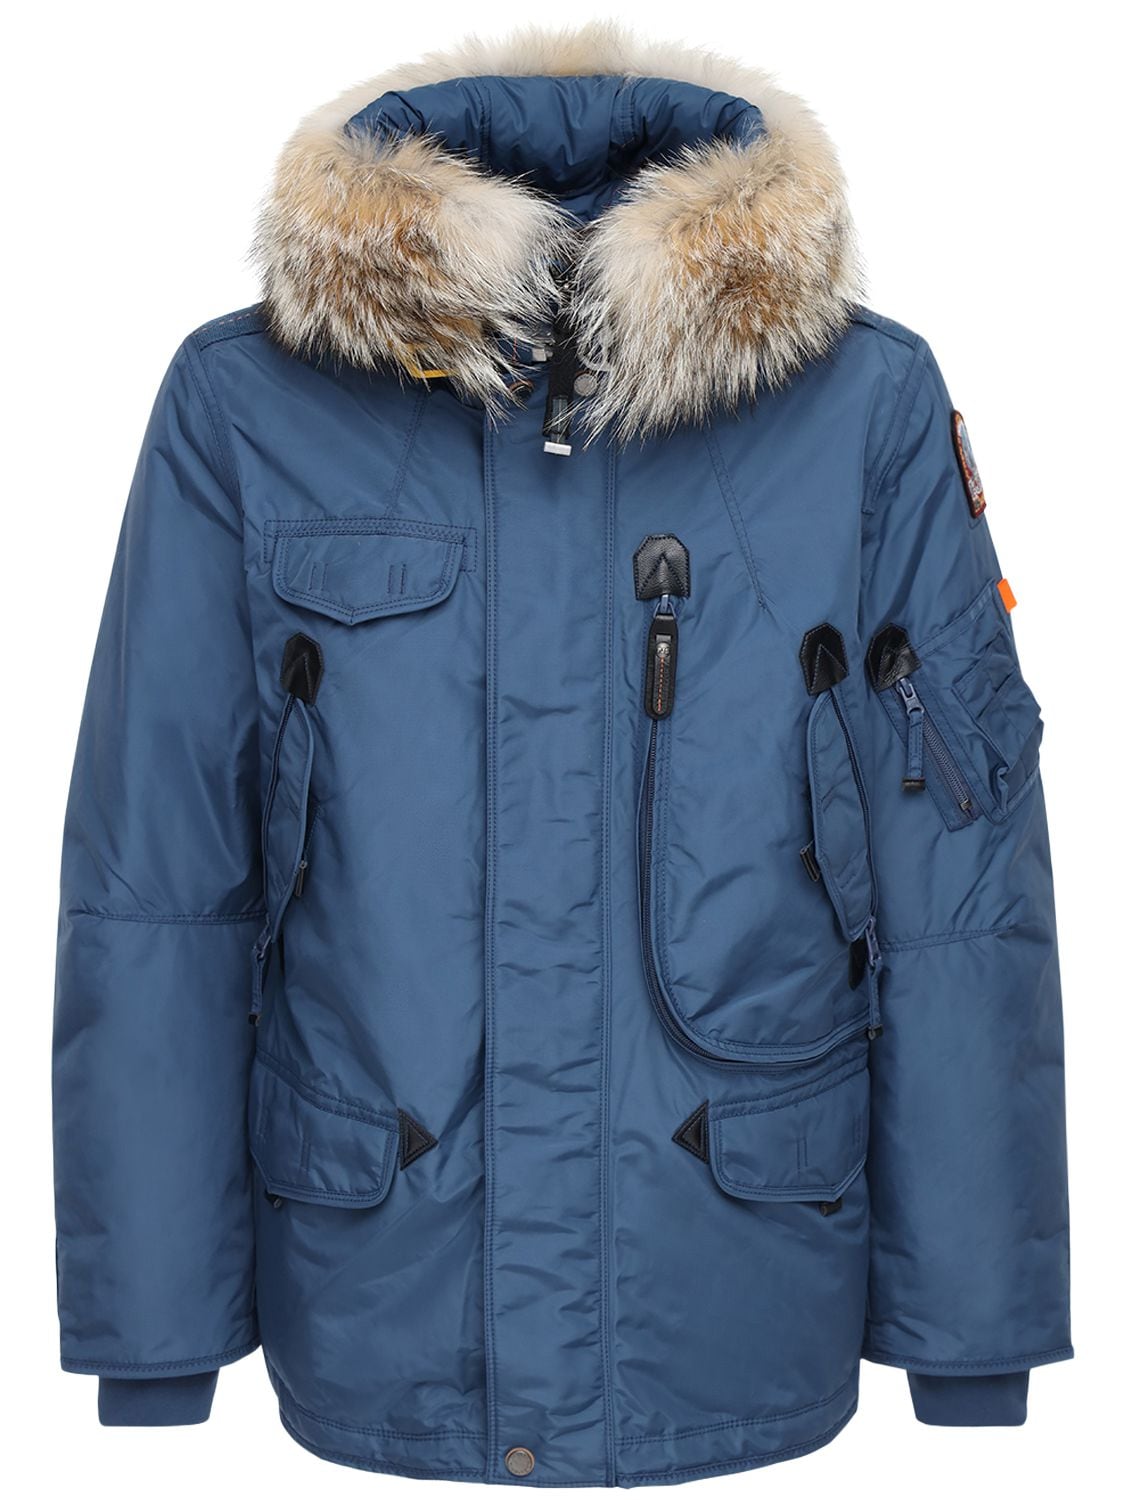 Parajumpers Right Hand Down Jacket W/ Fur In Sargasso Sea | ModeSens